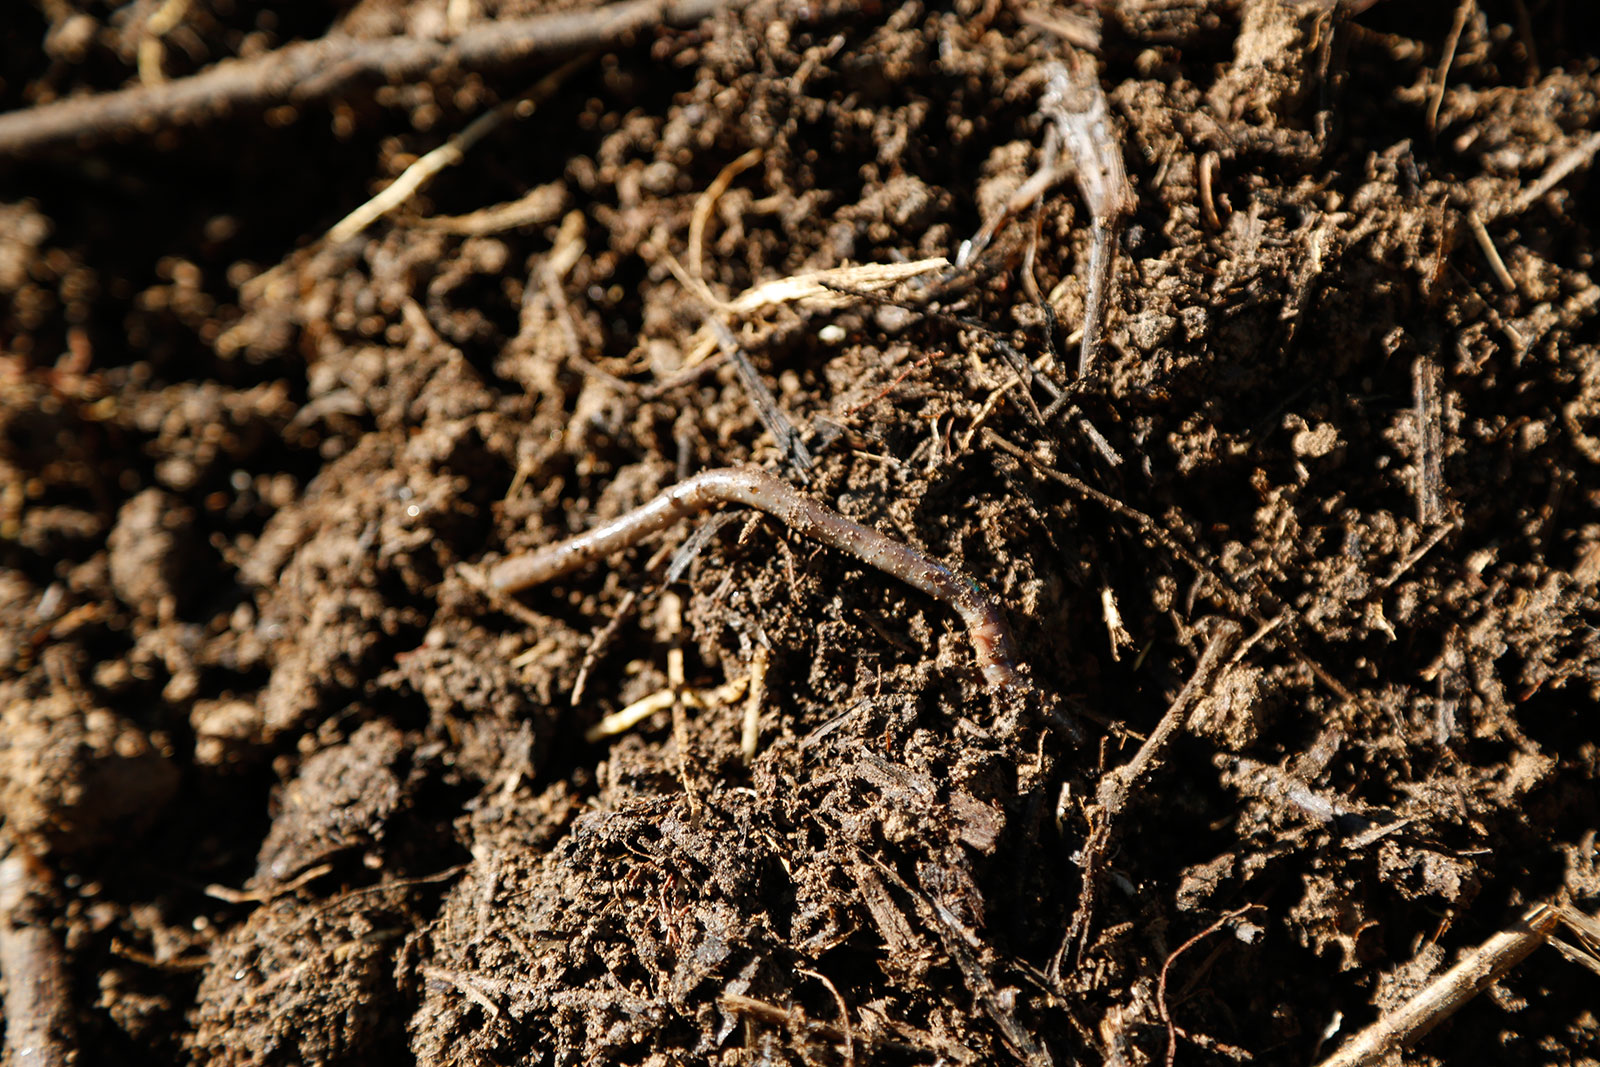 Finished compost is rich with life and bioavailable nutrients for plants to turn into food.